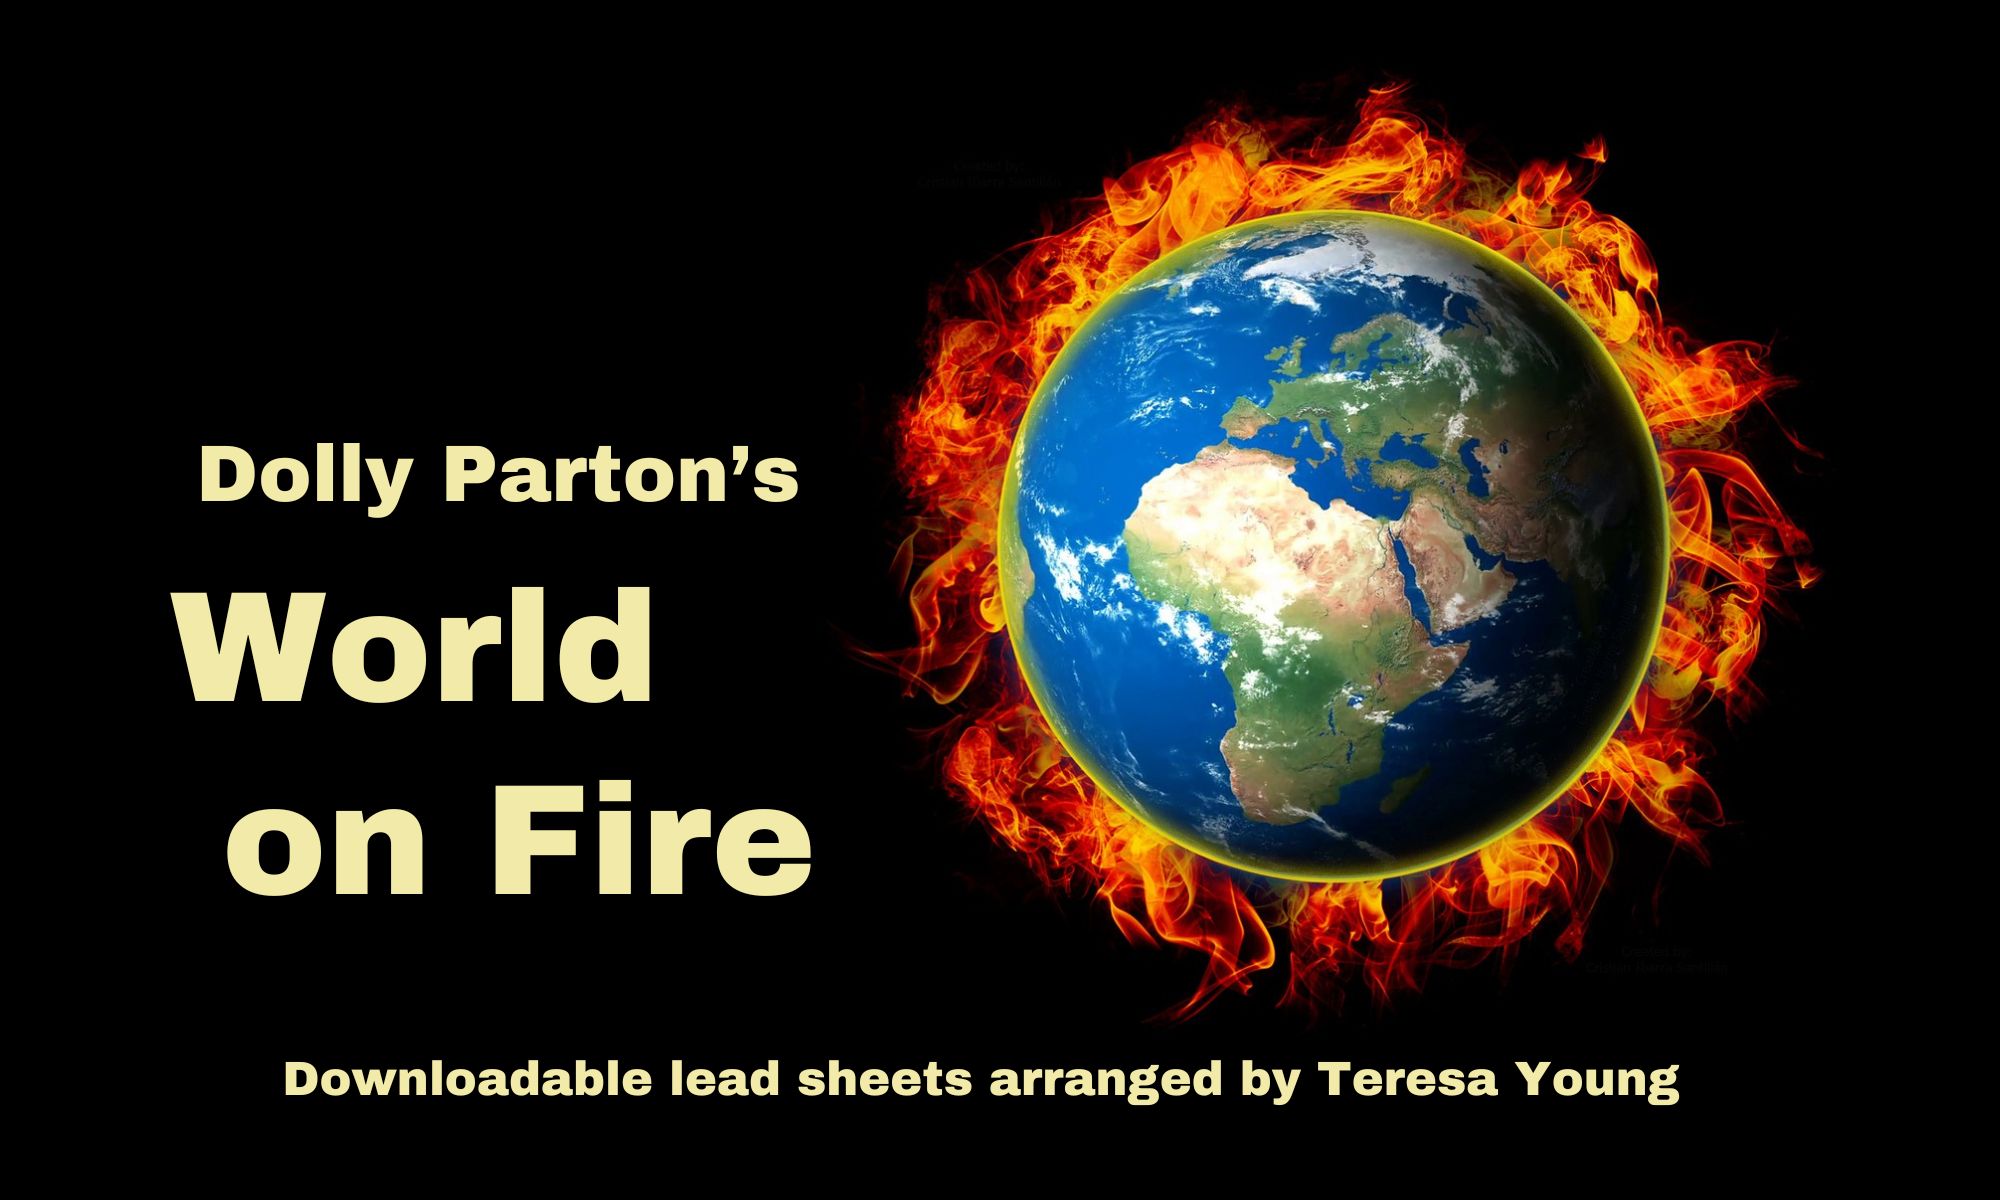 Dolly Parton's World on Fire, arr. by Teresa Young